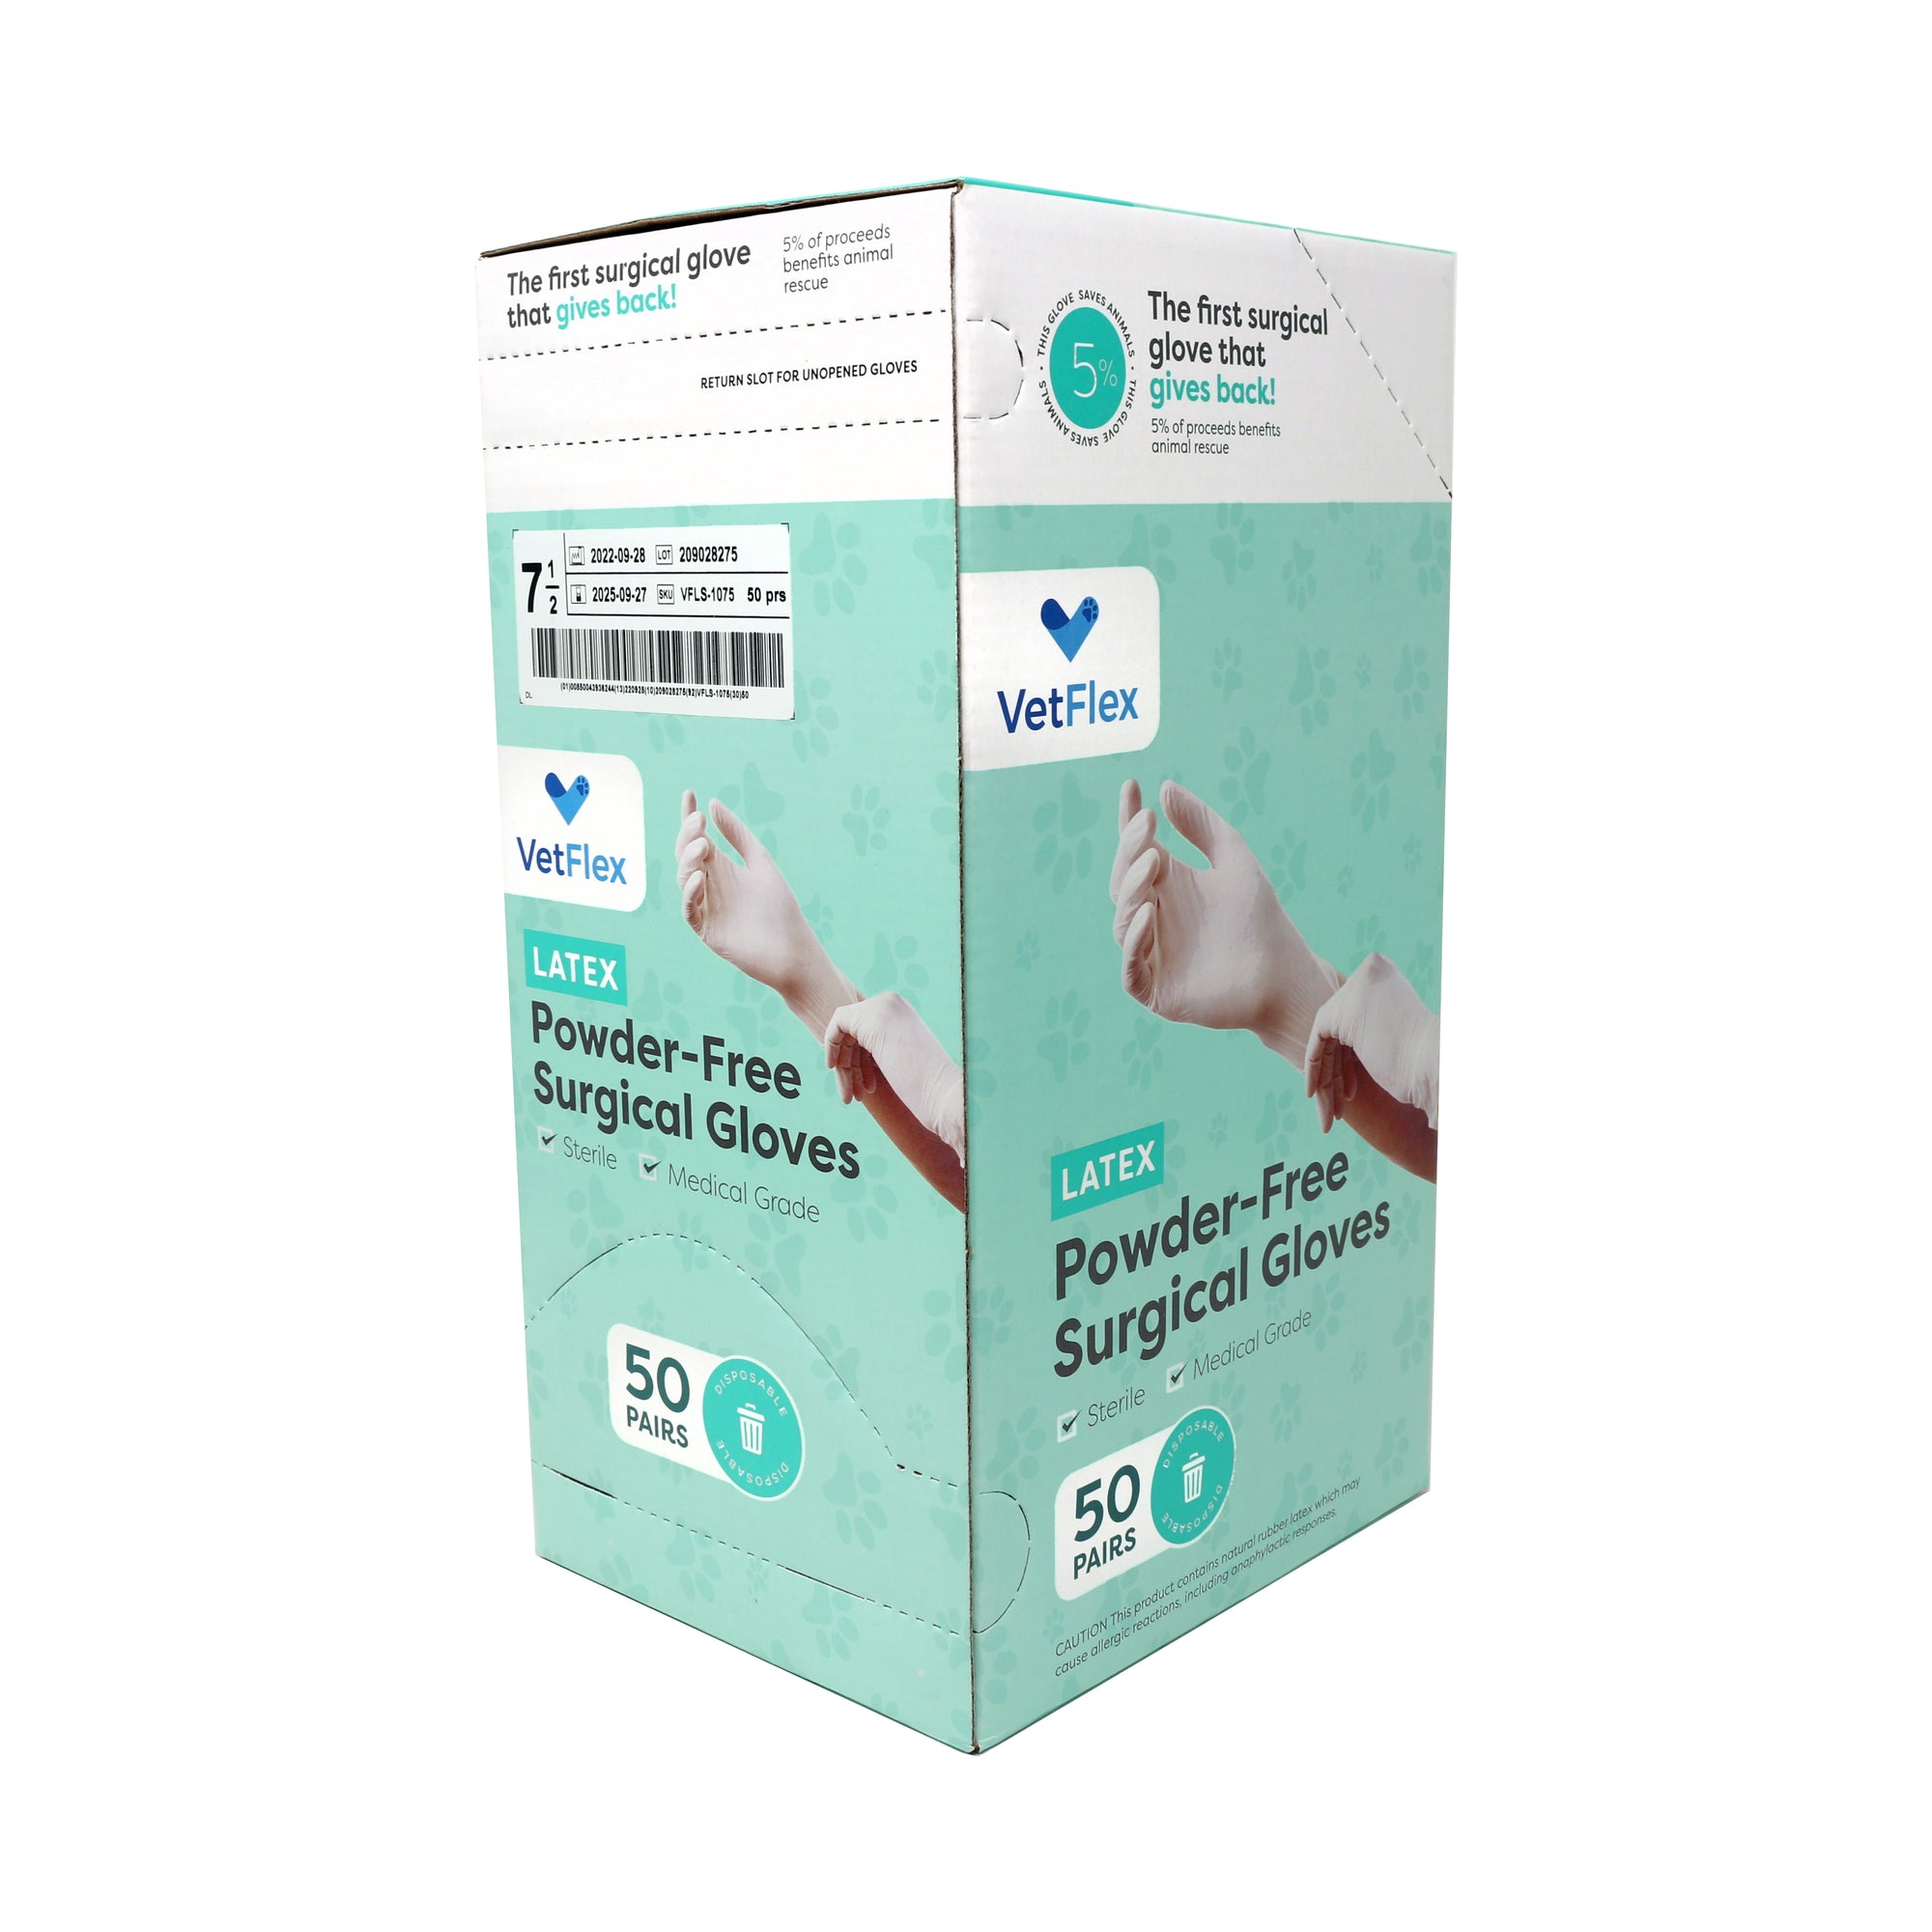 VetFlex Latex Sterile Surgical Gloves (Box of 50 Pairs)